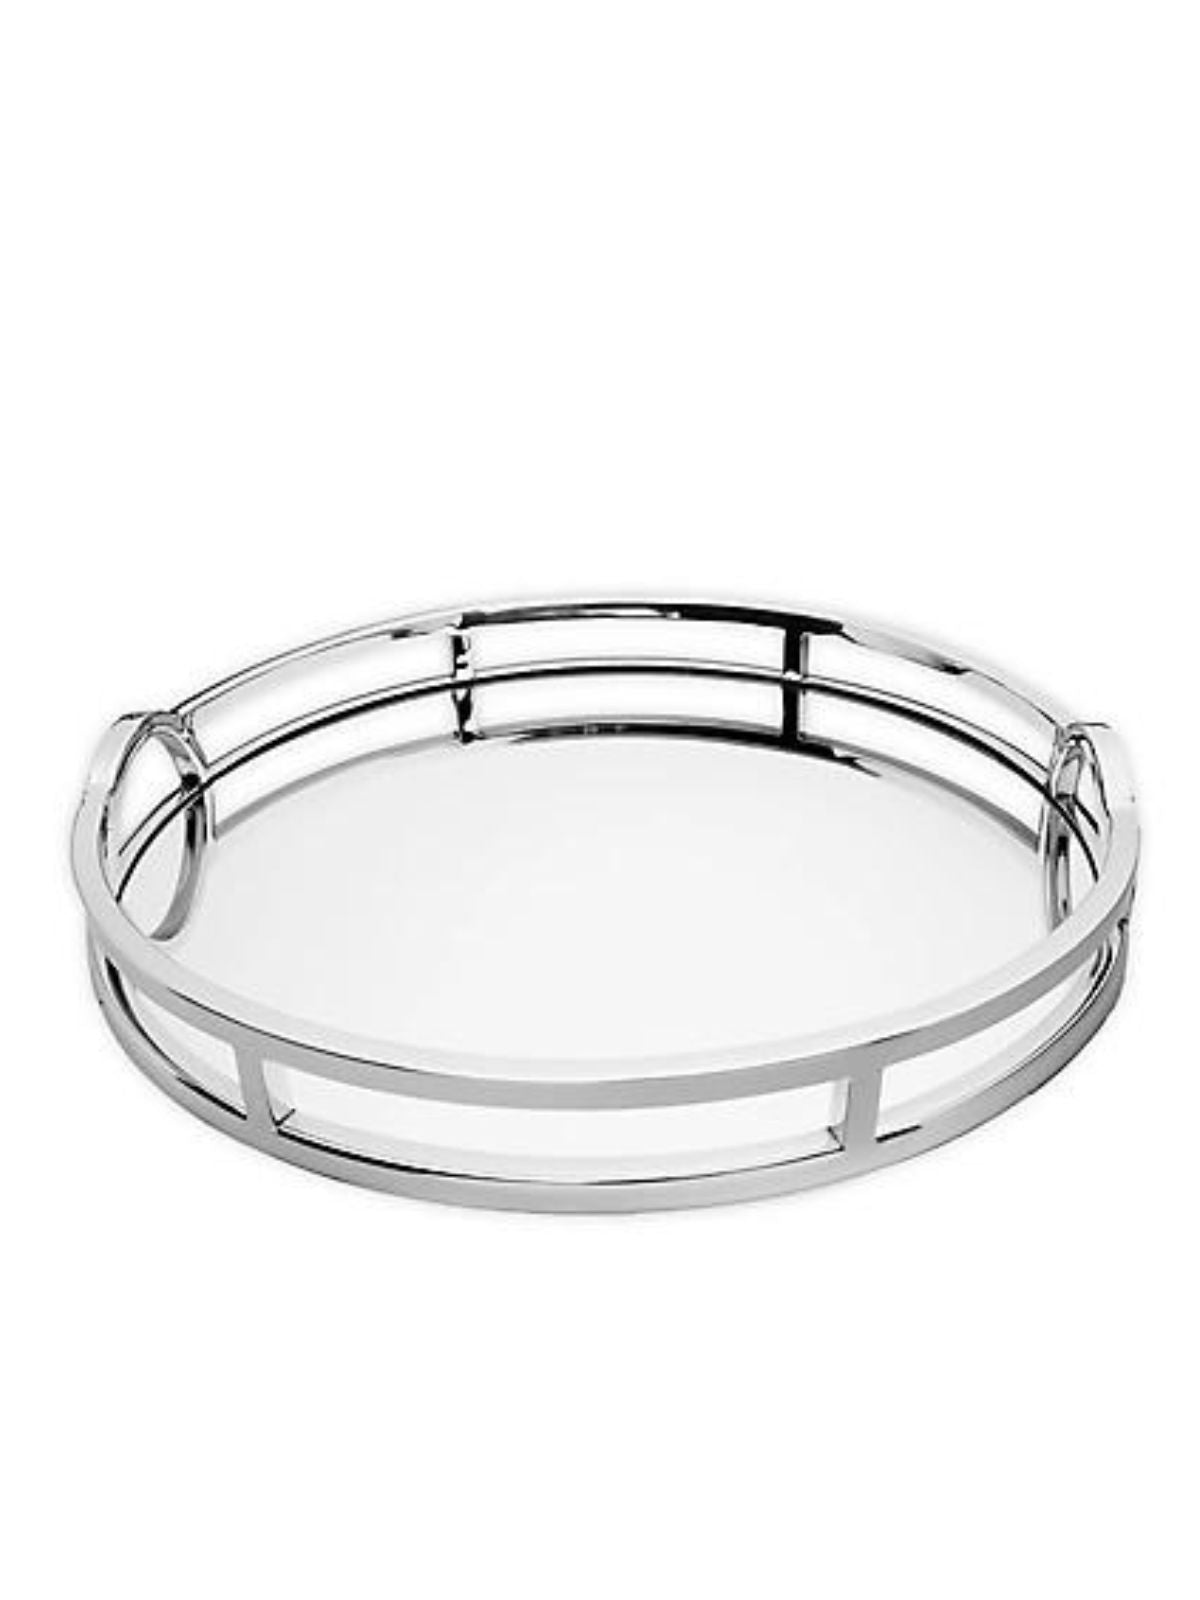 Stainless Steel Mirrored Tray with Modern Loop Design, 15D.